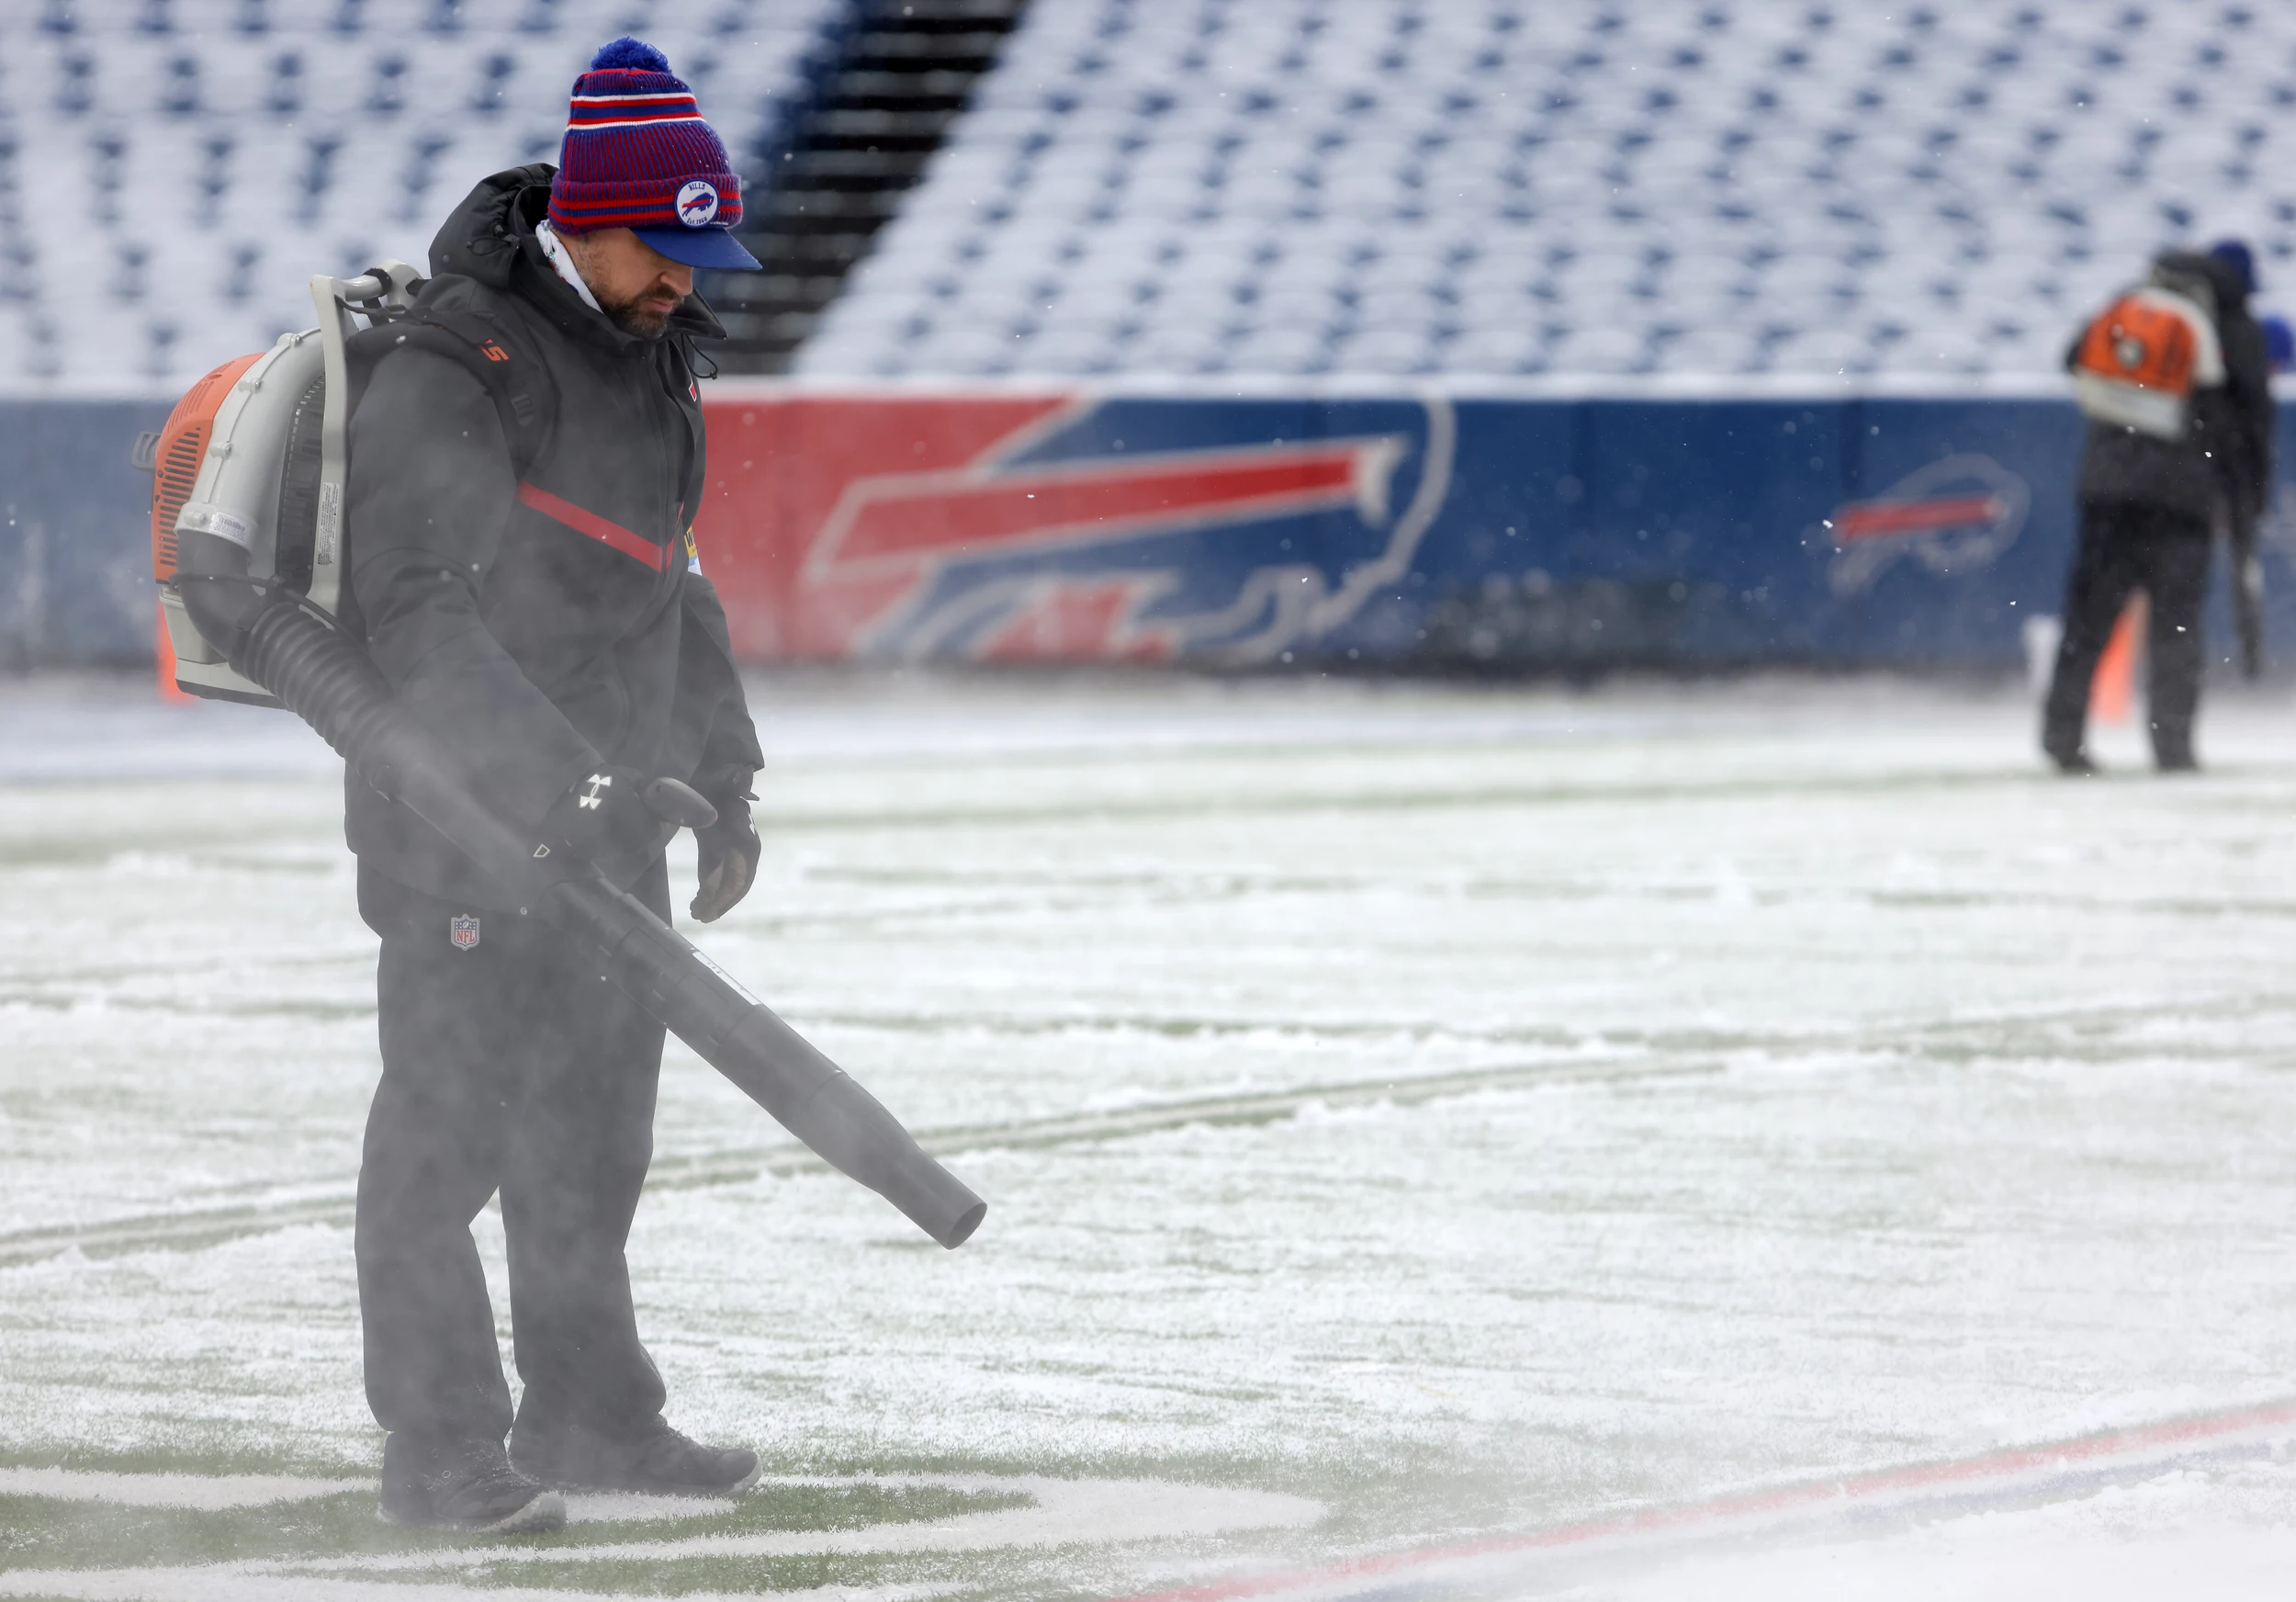 Sunday's Bills game moved to Detriot due to snow